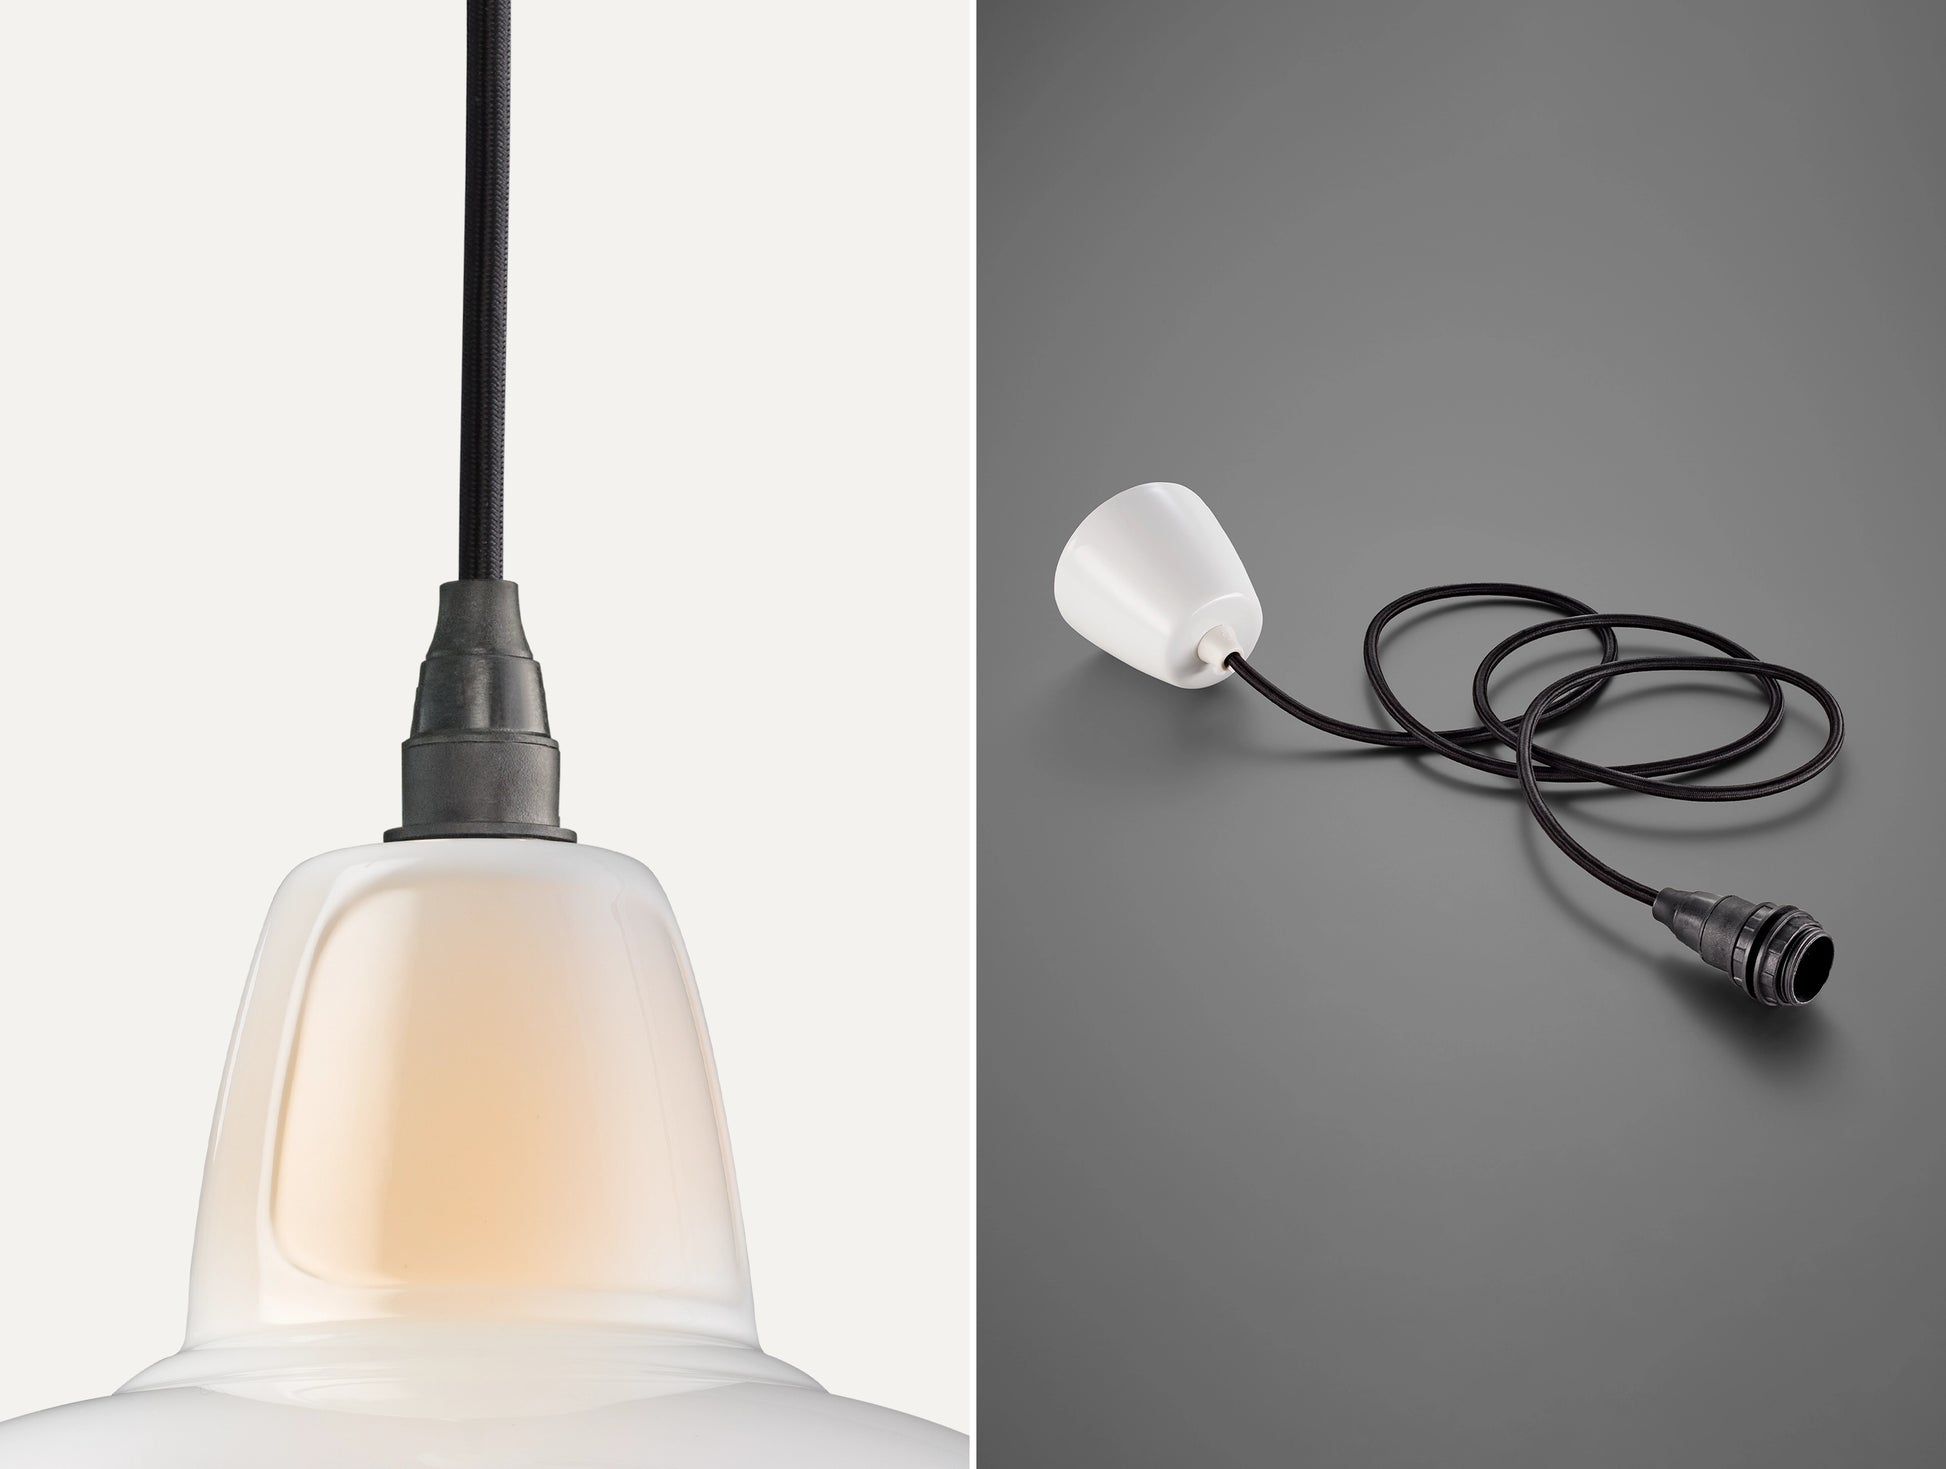 Close up of an E14 Industrial suspension set on a Bone China Silhouette lampshade on the left. On the right, an E14 Industrial pendant set is coiled on a dark grey background